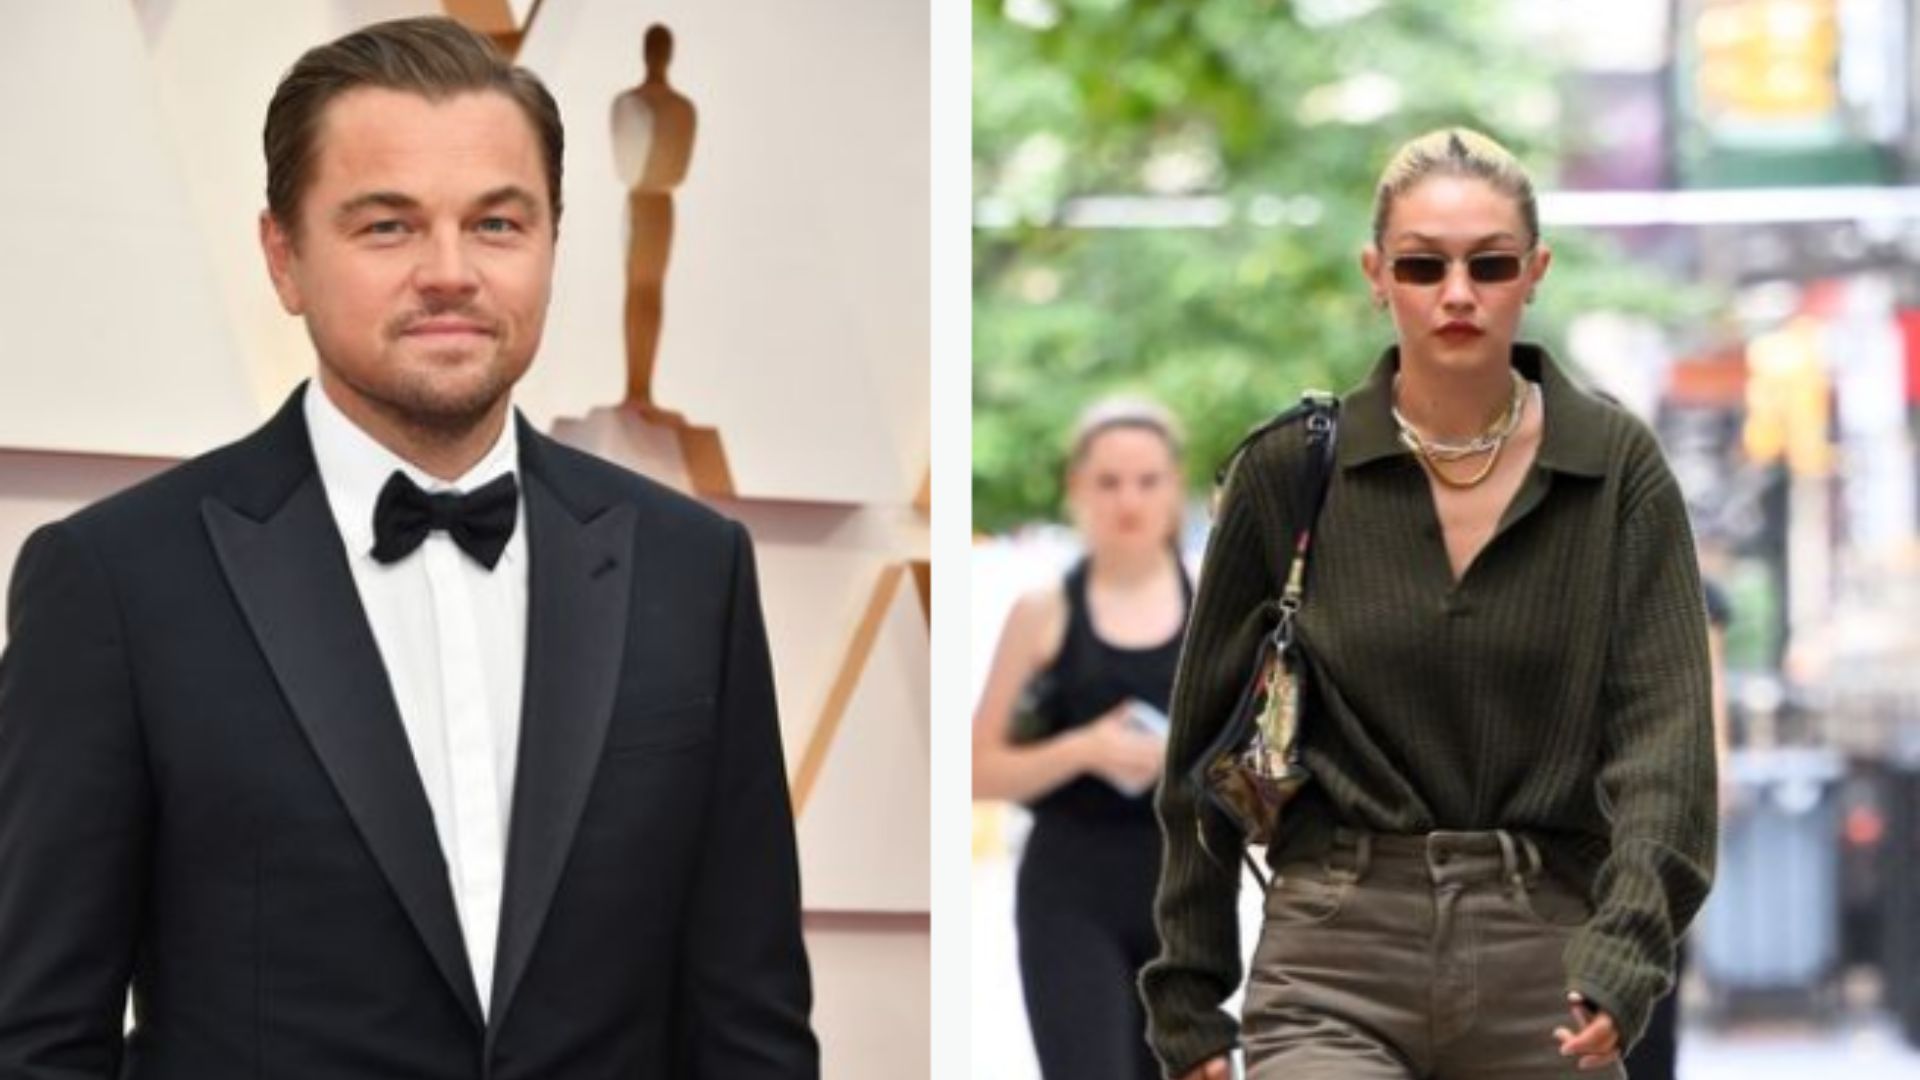 Leonardo DiCaprio and Gigi Hadid are spotted together at the party